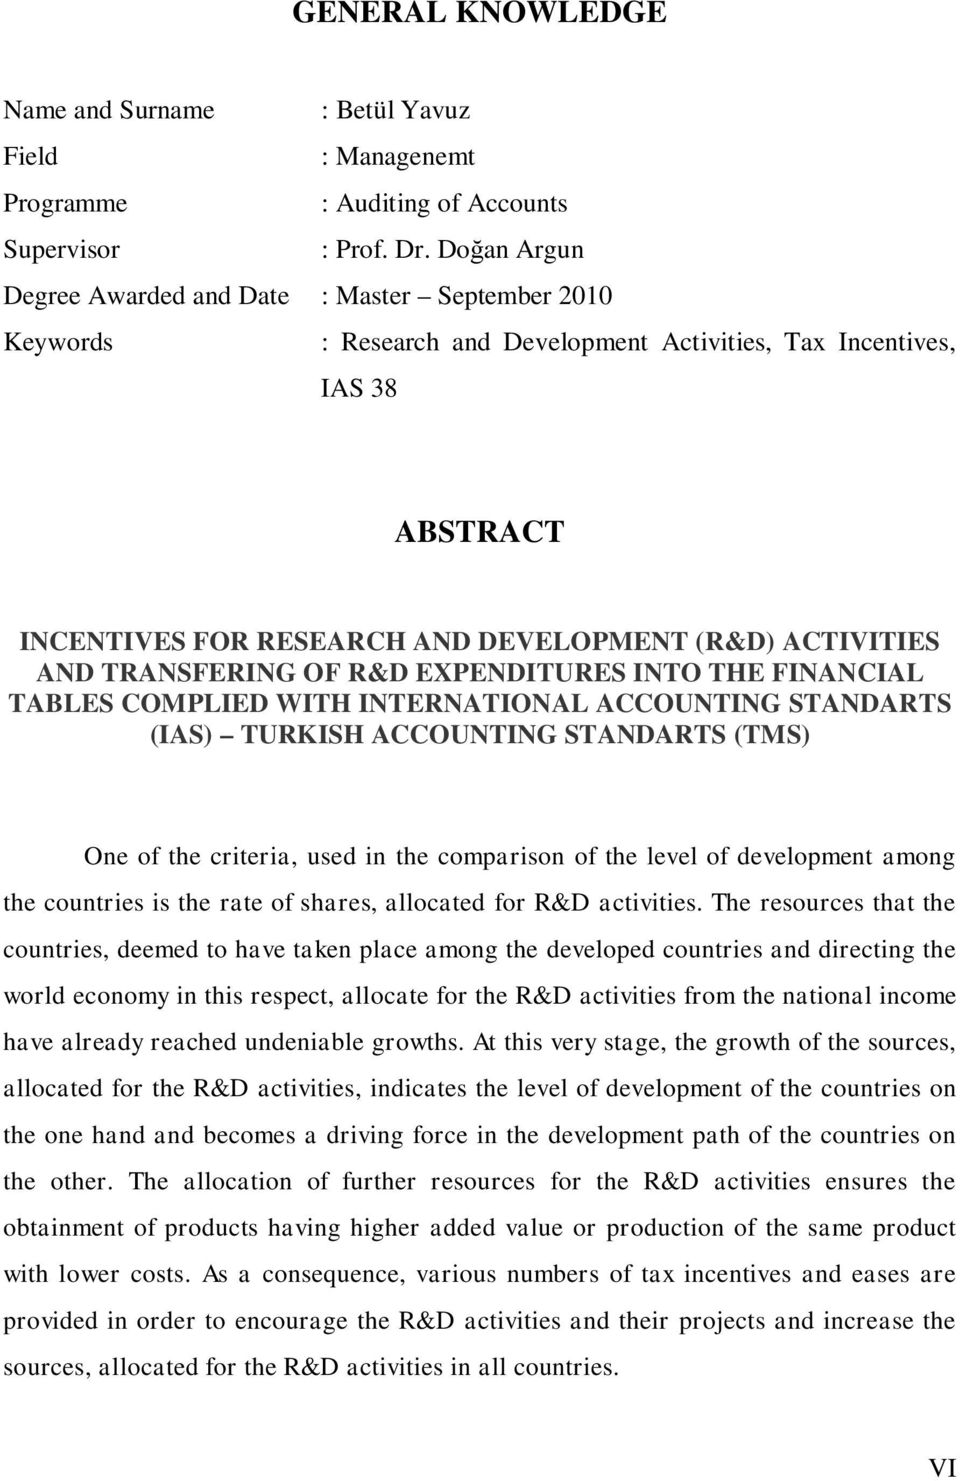 AND TRANSFERING OF R&D EXPENDITURES INTO THE FINANCIAL TABLES COMPLIED WITH INTERNATIONAL ACCOUNTING STANDARTS (IAS) TURKISH ACCOUNTING STANDARTS (TMS) One of the criteria, used in the comparison of